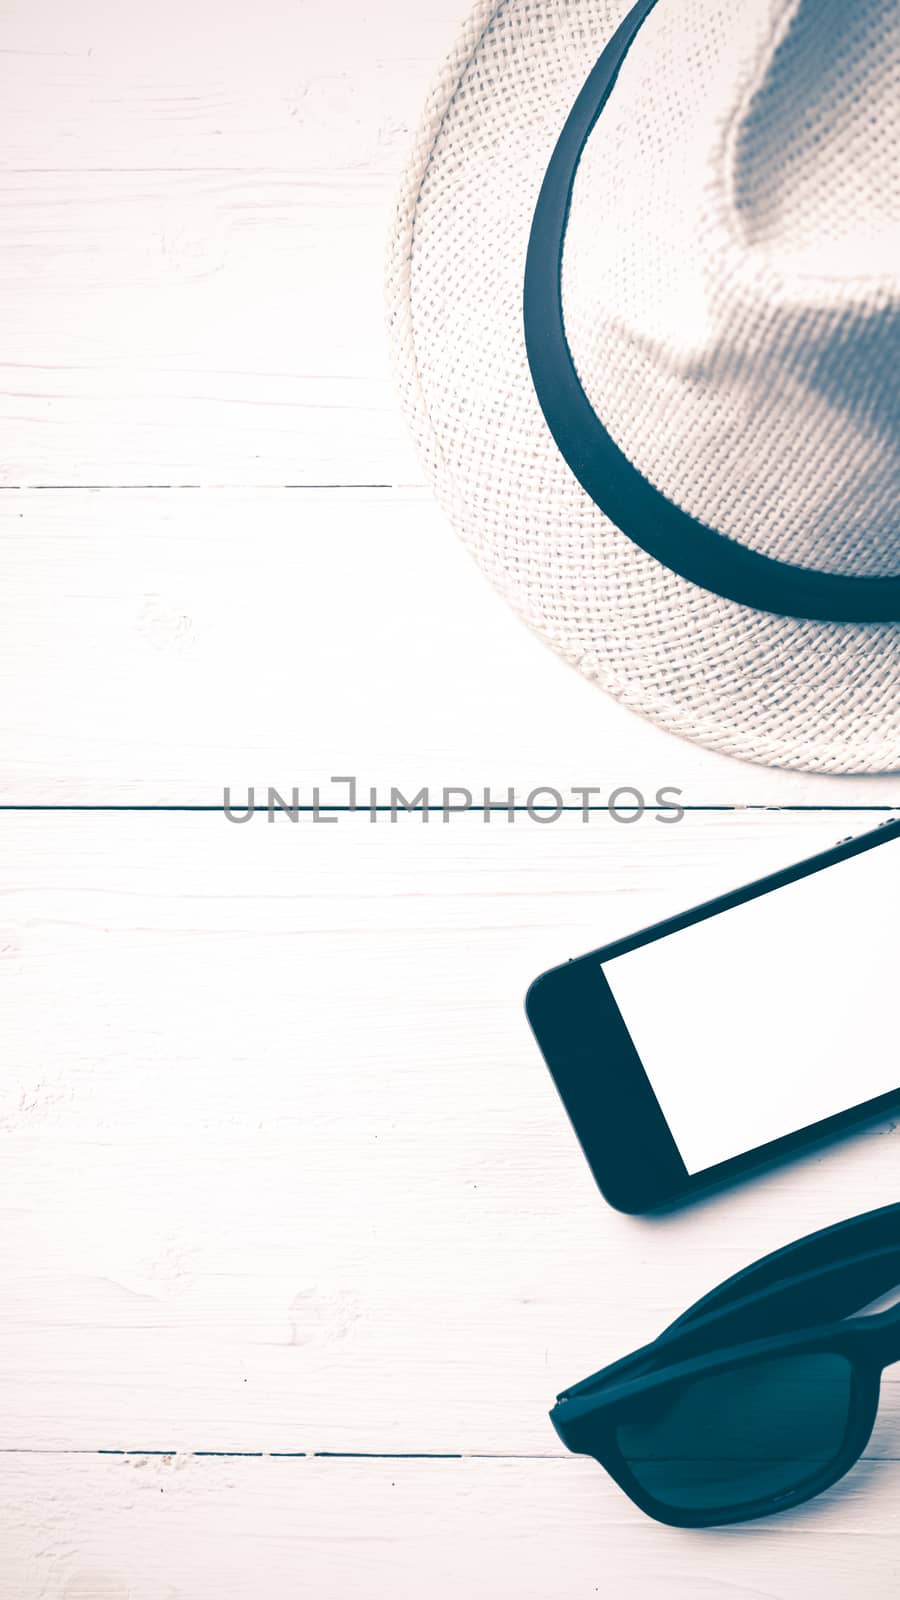 hat sunglasses and smart phone vintage style by ammza12